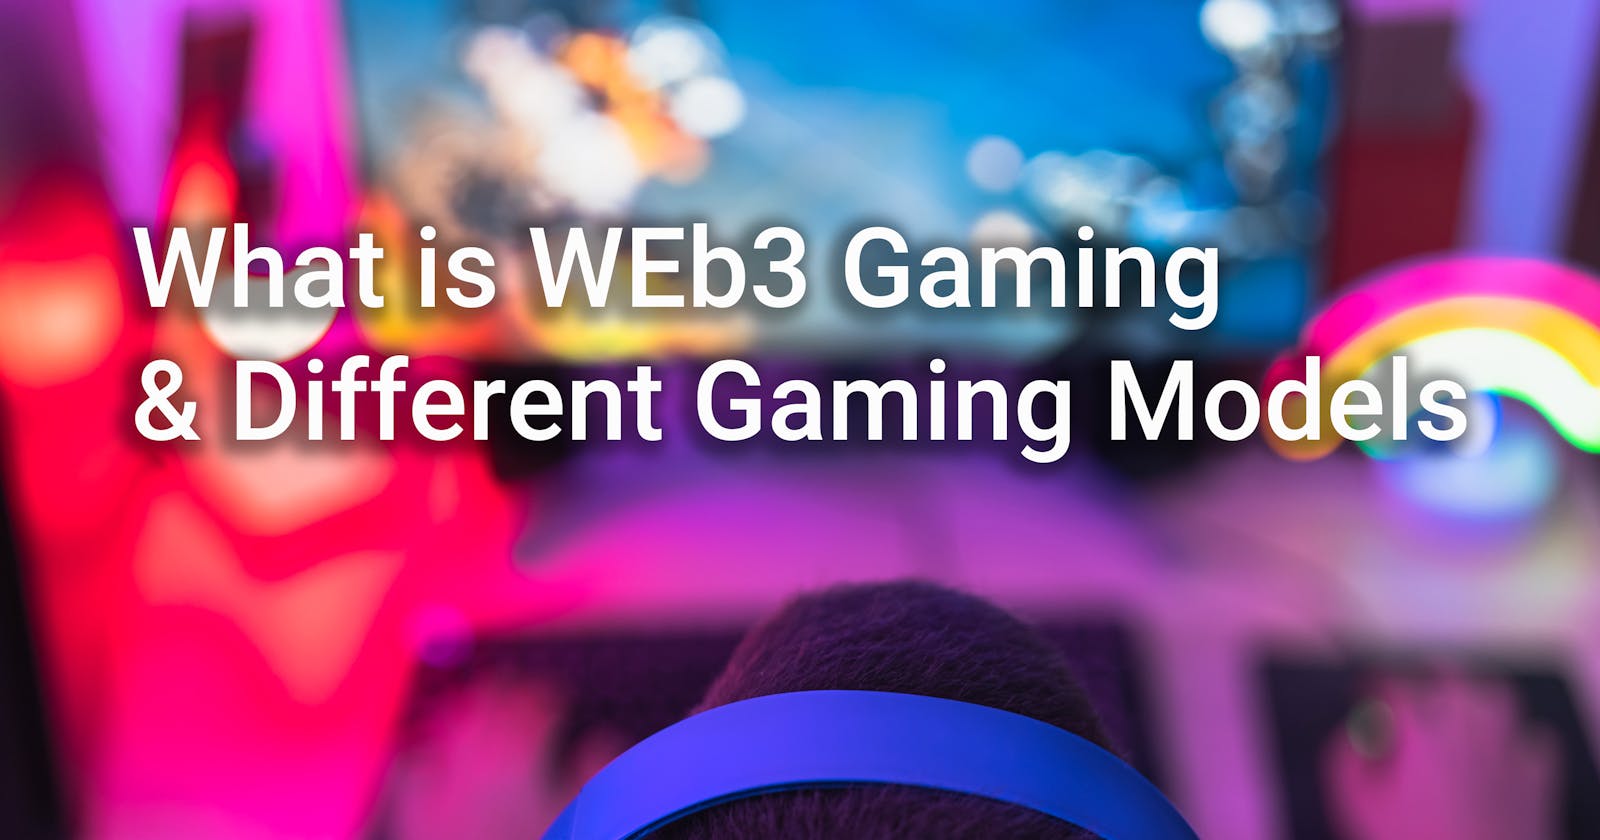 What is Web3 Gaming and the Different Web3 Gaming Models